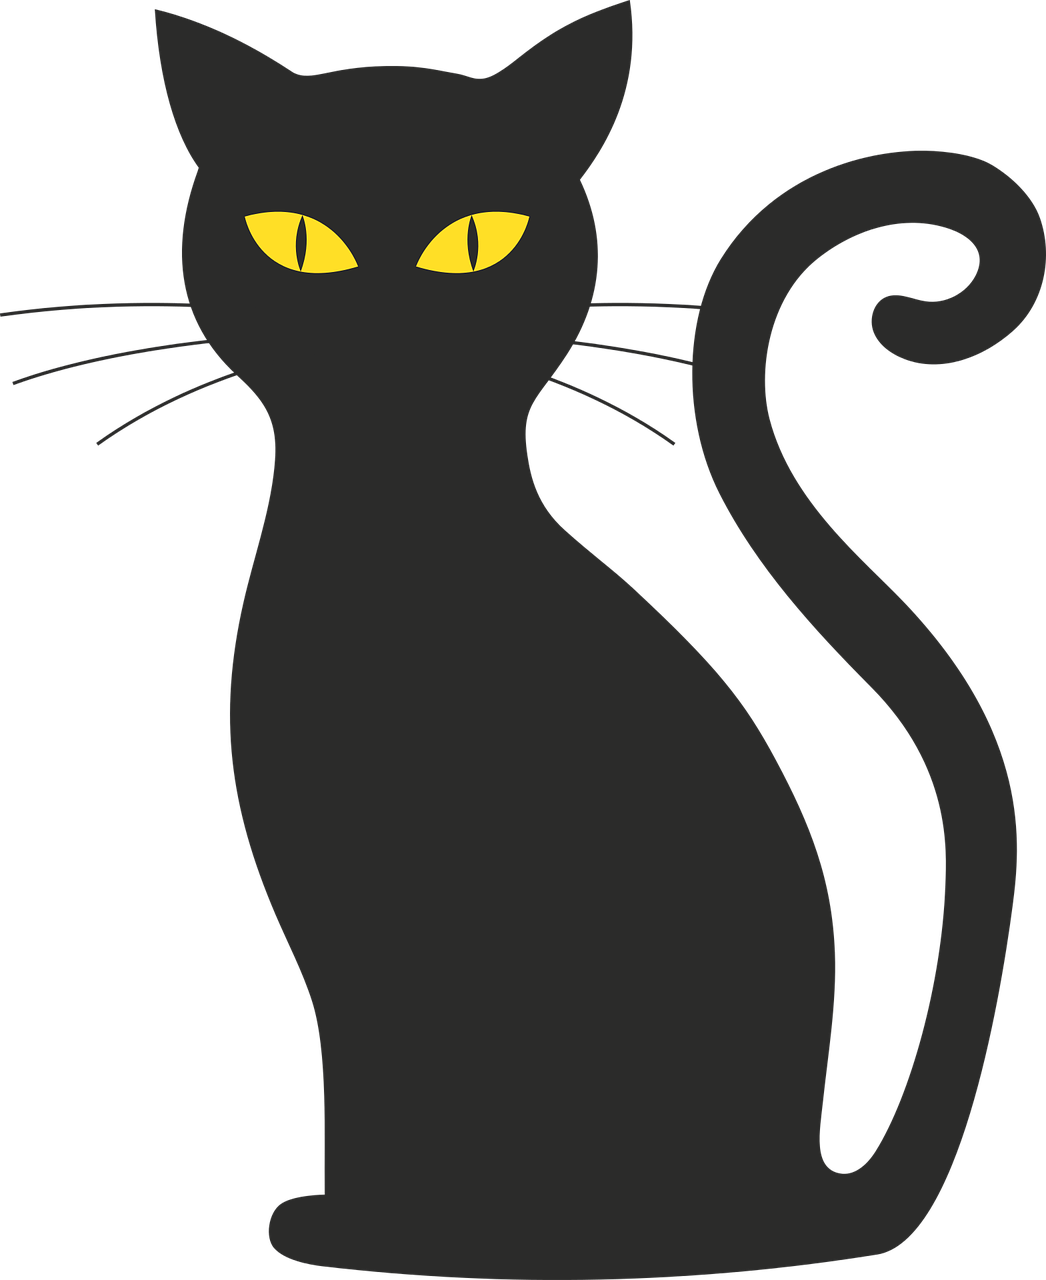 a black cat with yellow eyes, vector art, pixabay, minimalism, matisse, at nighttime, a tall, - h 8 0 4